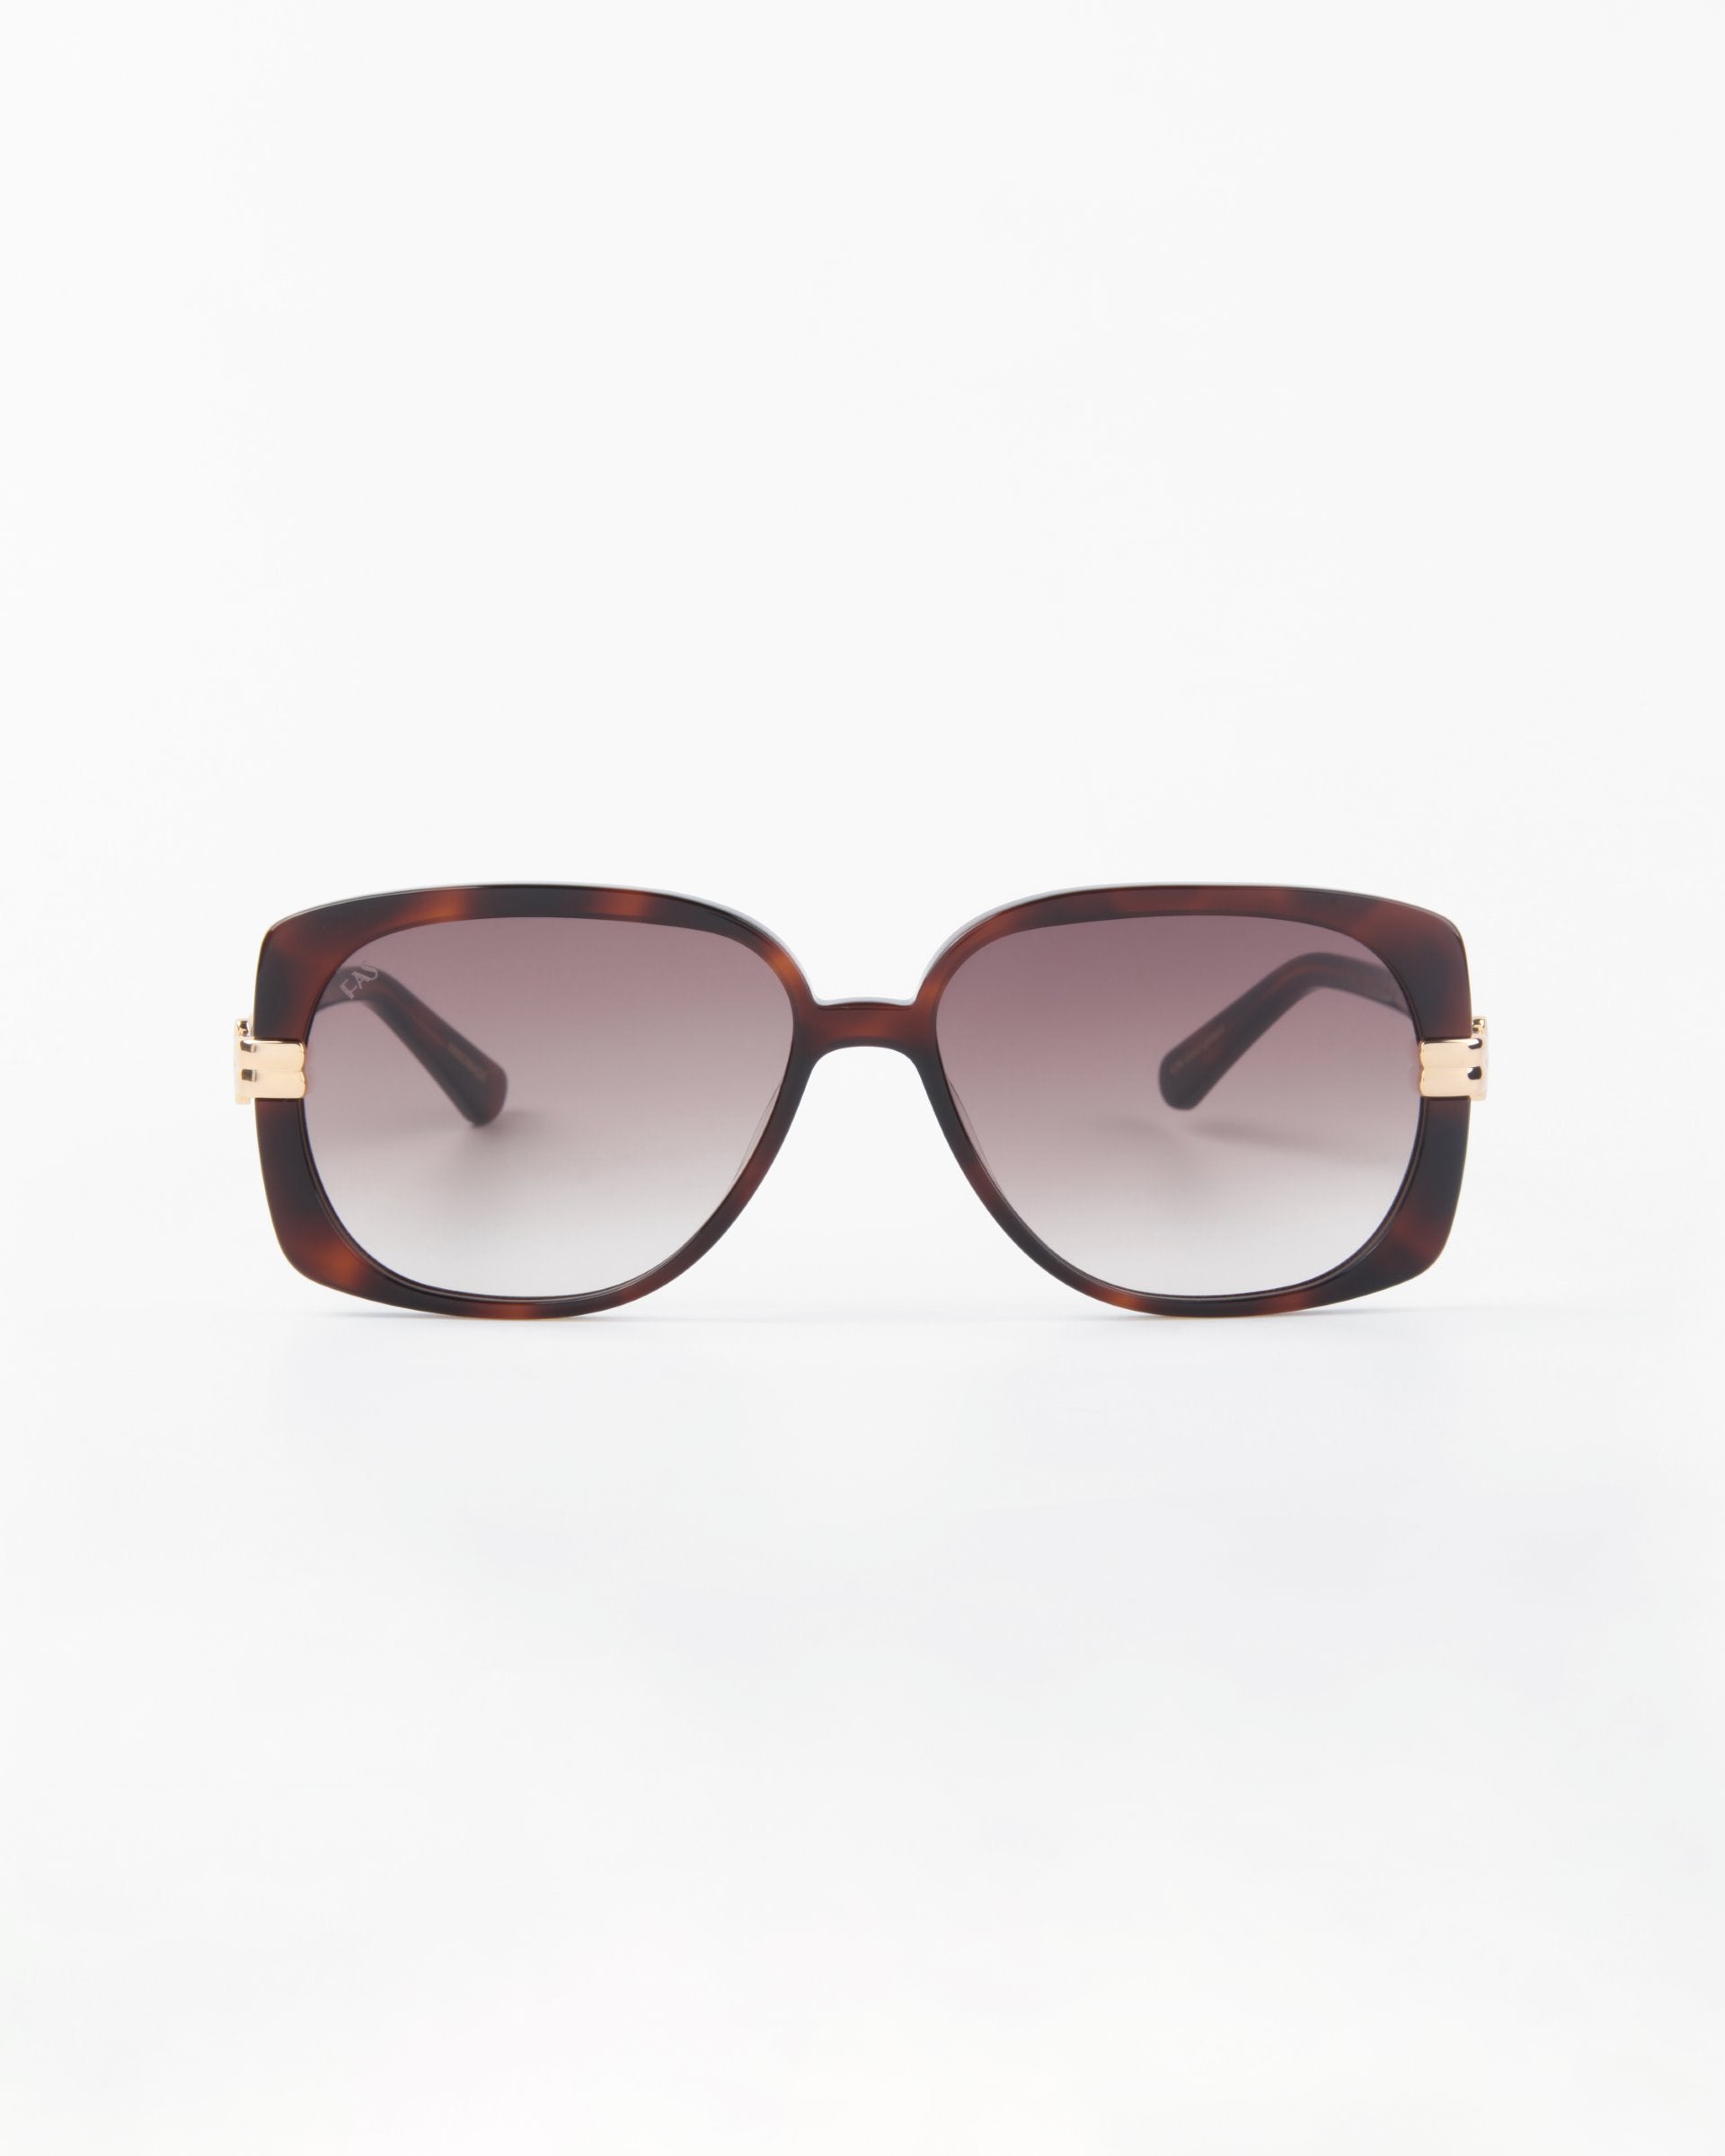 A pair of stylish, oversized Icon sunglasses with rectangular frames in a dark tortoiseshell pattern from For Art's Sake®. Handmade with shatter-resistant nylon lenses, they feature gradient lenses and small gold accents on the temples. The UVA & UVB-protected sunglasses are set against a plain white background.